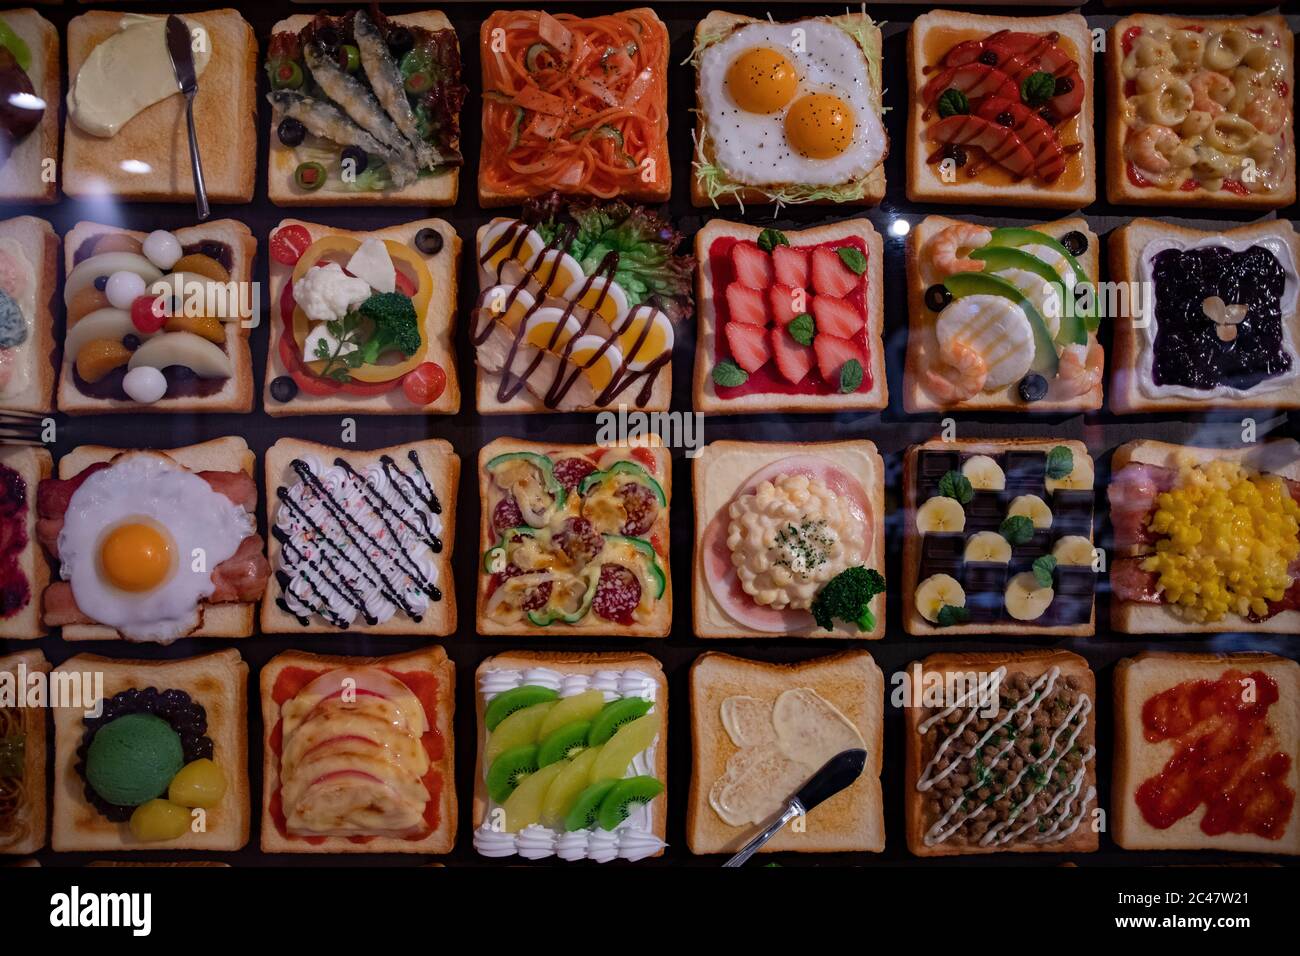 Close-up on toast with various dressing. Artificial food made by wax. Shop window display, restaurant menu food sample. Stock Photo